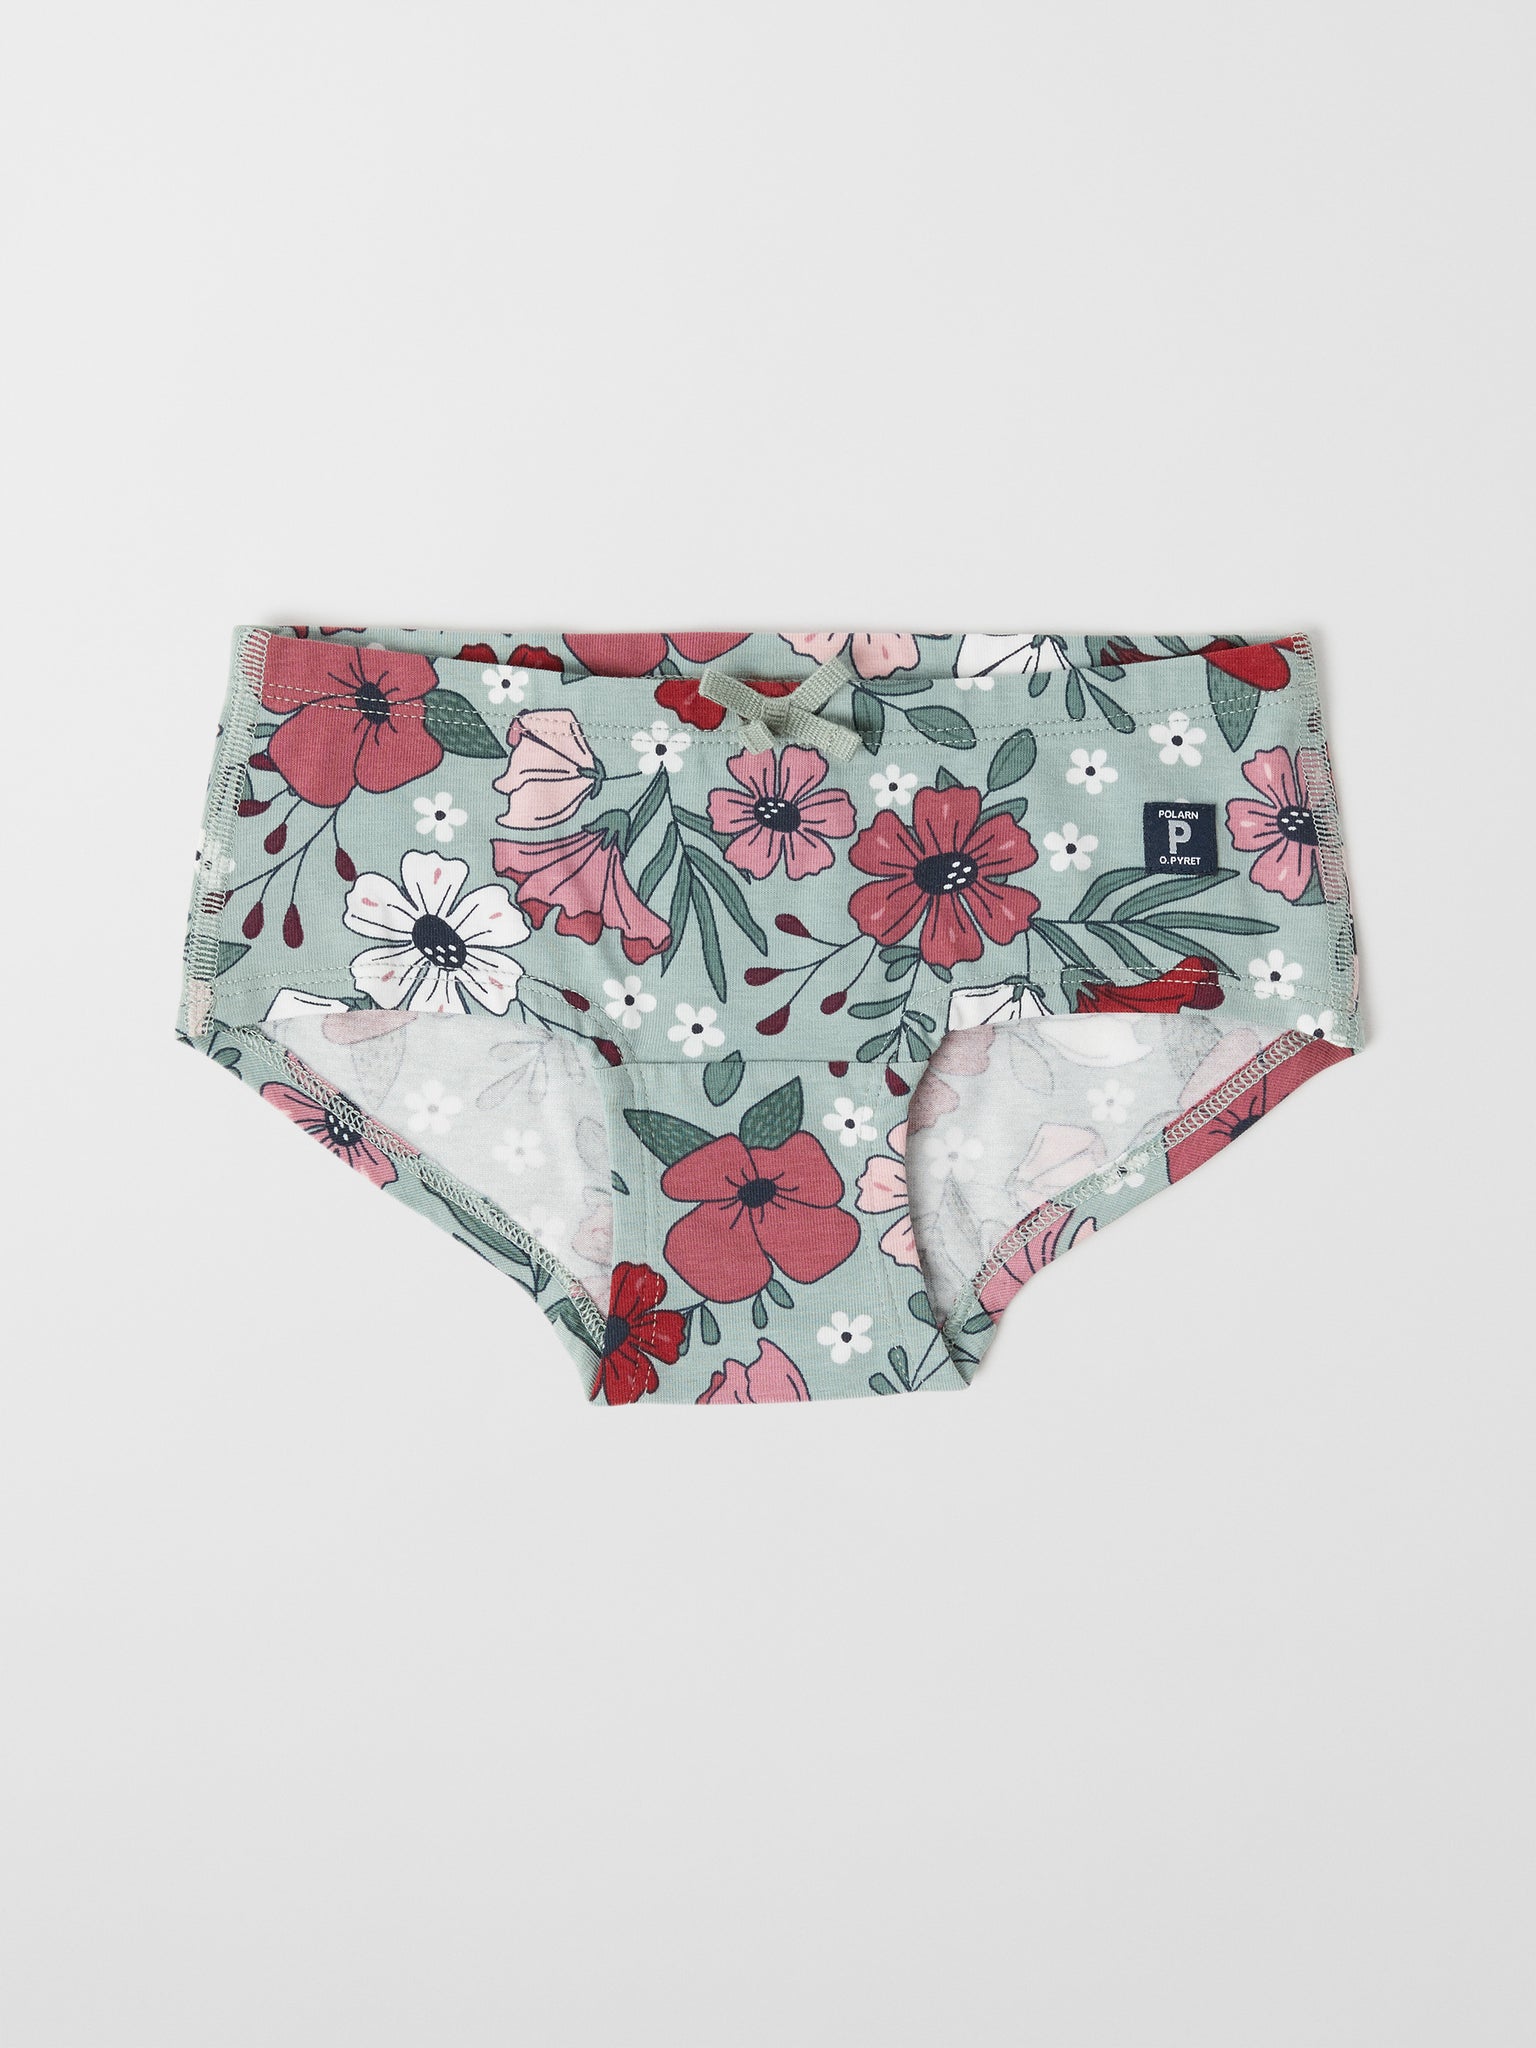 Girls Green Organic Cotton Briefs from the Polarn O. Pyret kidswear collection. Clothes made using sustainably sourced materials.